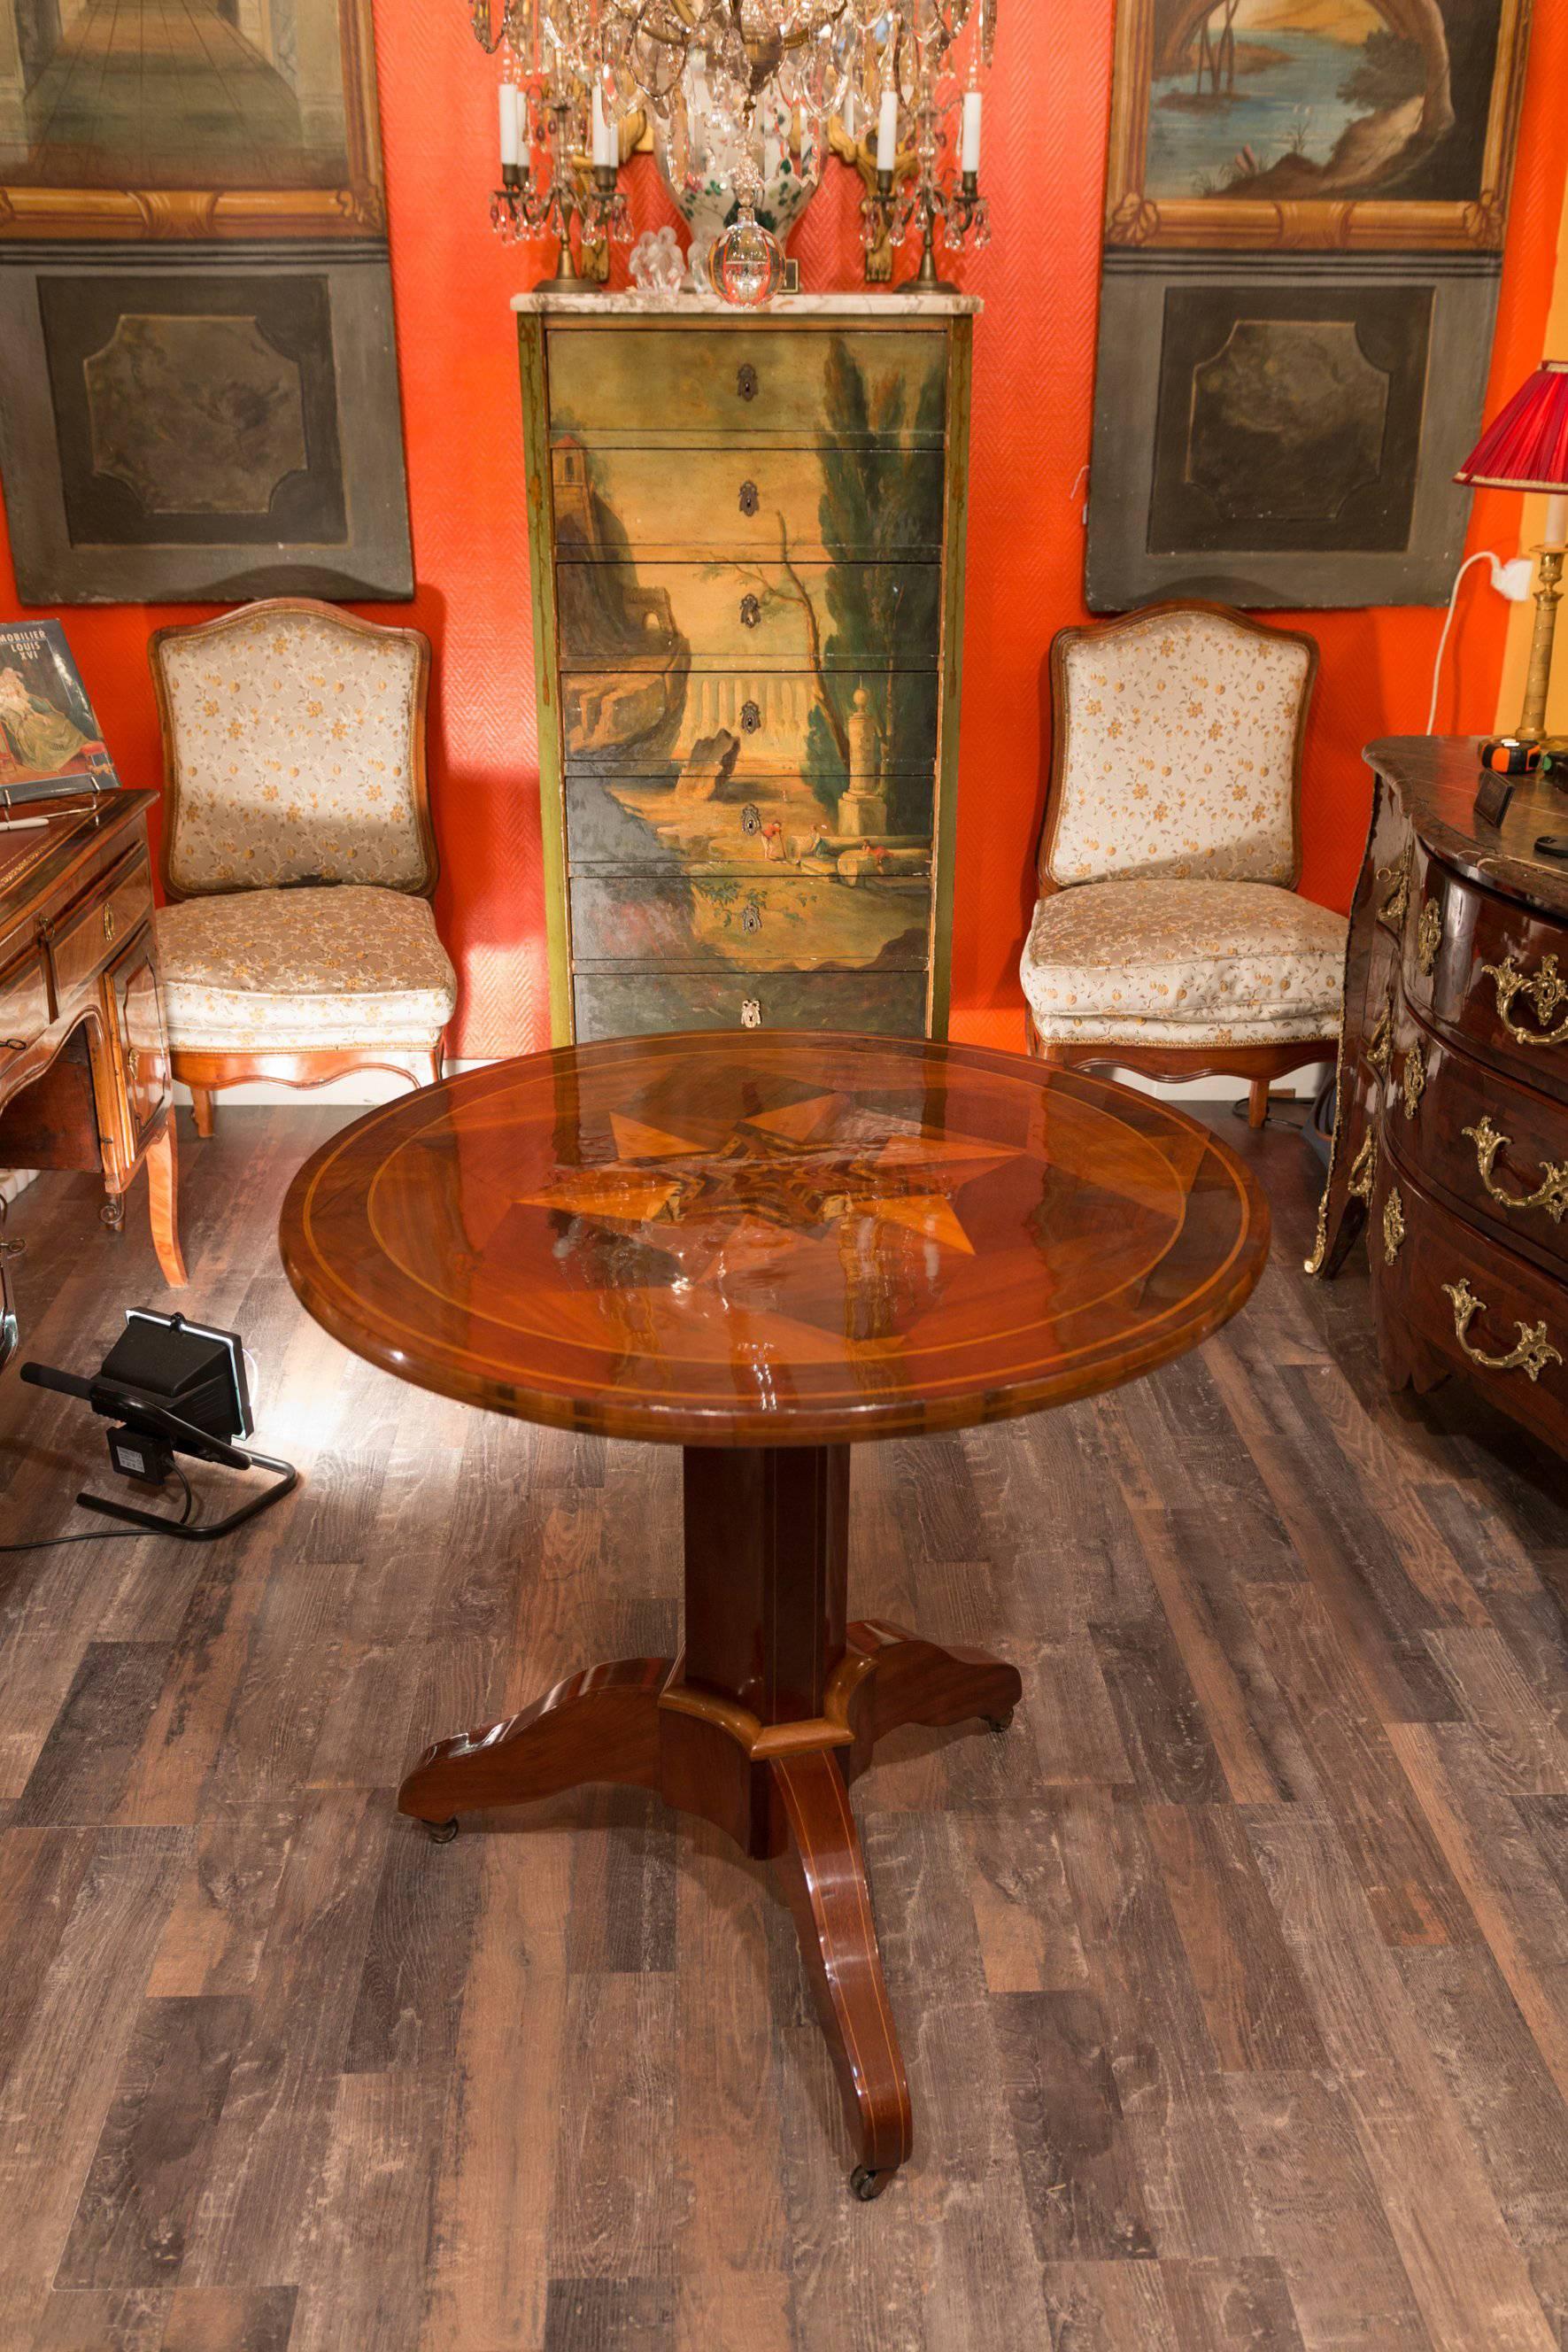 A gorgeous French pedestal round tilts top table, with lovely inlay of walnut, plum wood, Sycamore. The table is resting on a three-round footed pedestal base. 

Our table is in excellent condition. The underside of the table has clear and